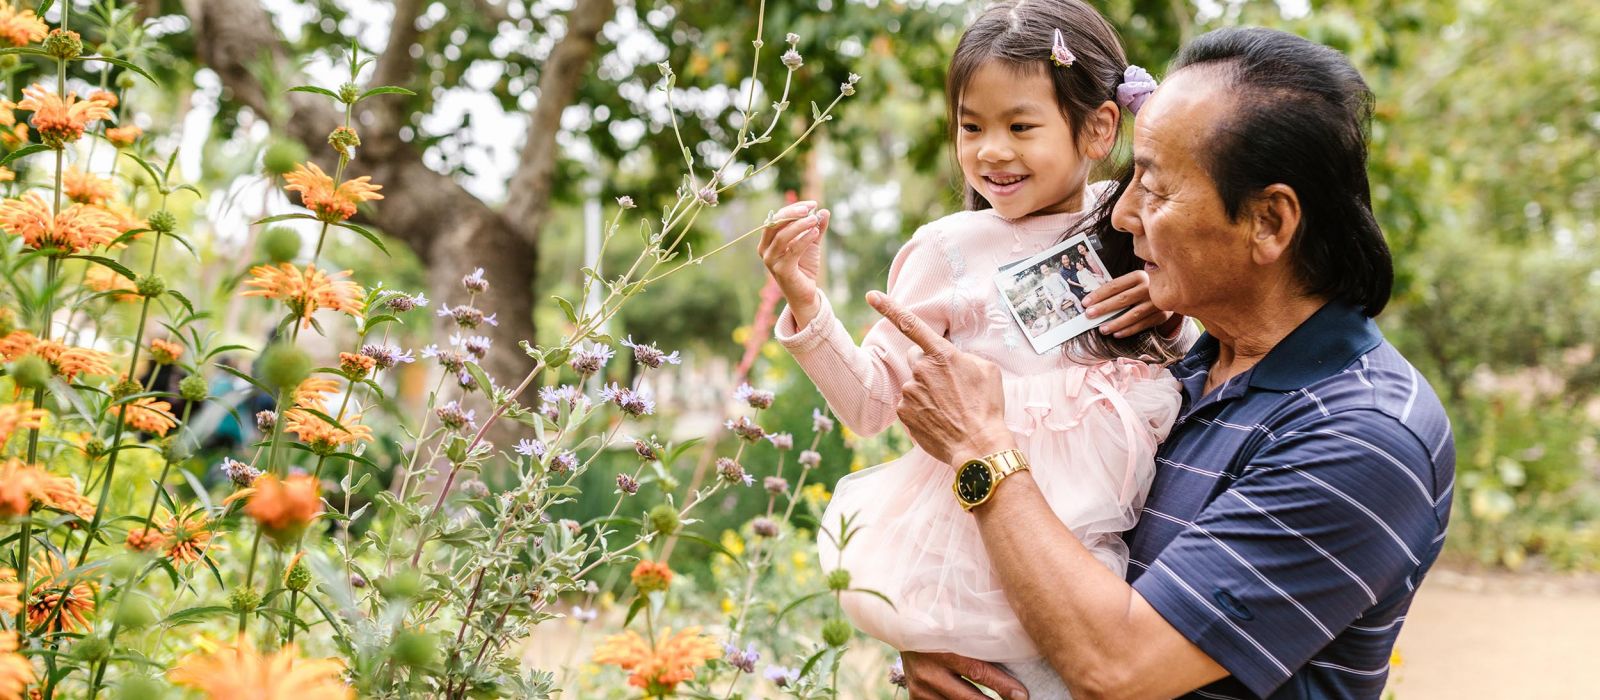 Elderly grandfather holding granddaughter while looking at orange wildflowers